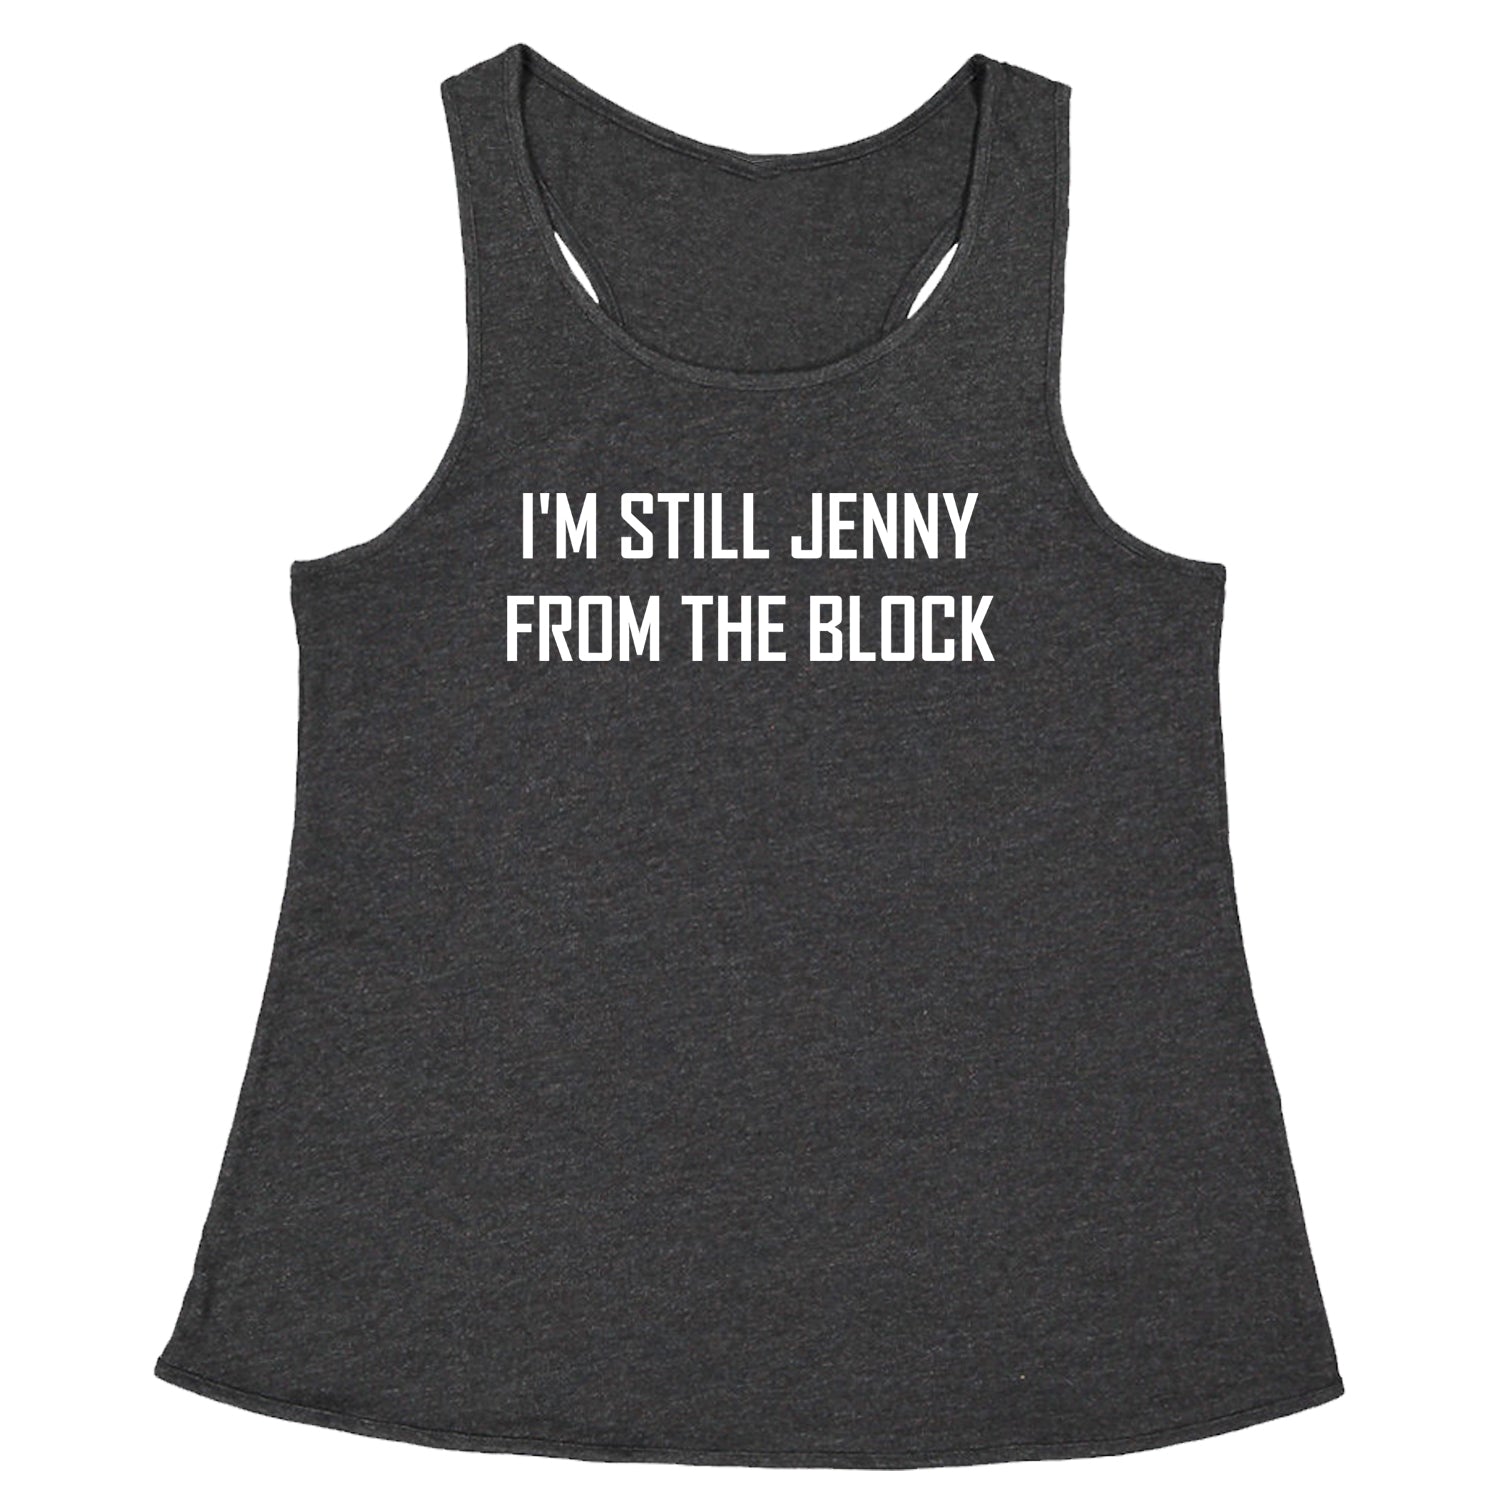 I'm Still Jenny From The Block Racerback Tank Top for Women concert, jennifer, lopez, merch, tour by Expression Tees